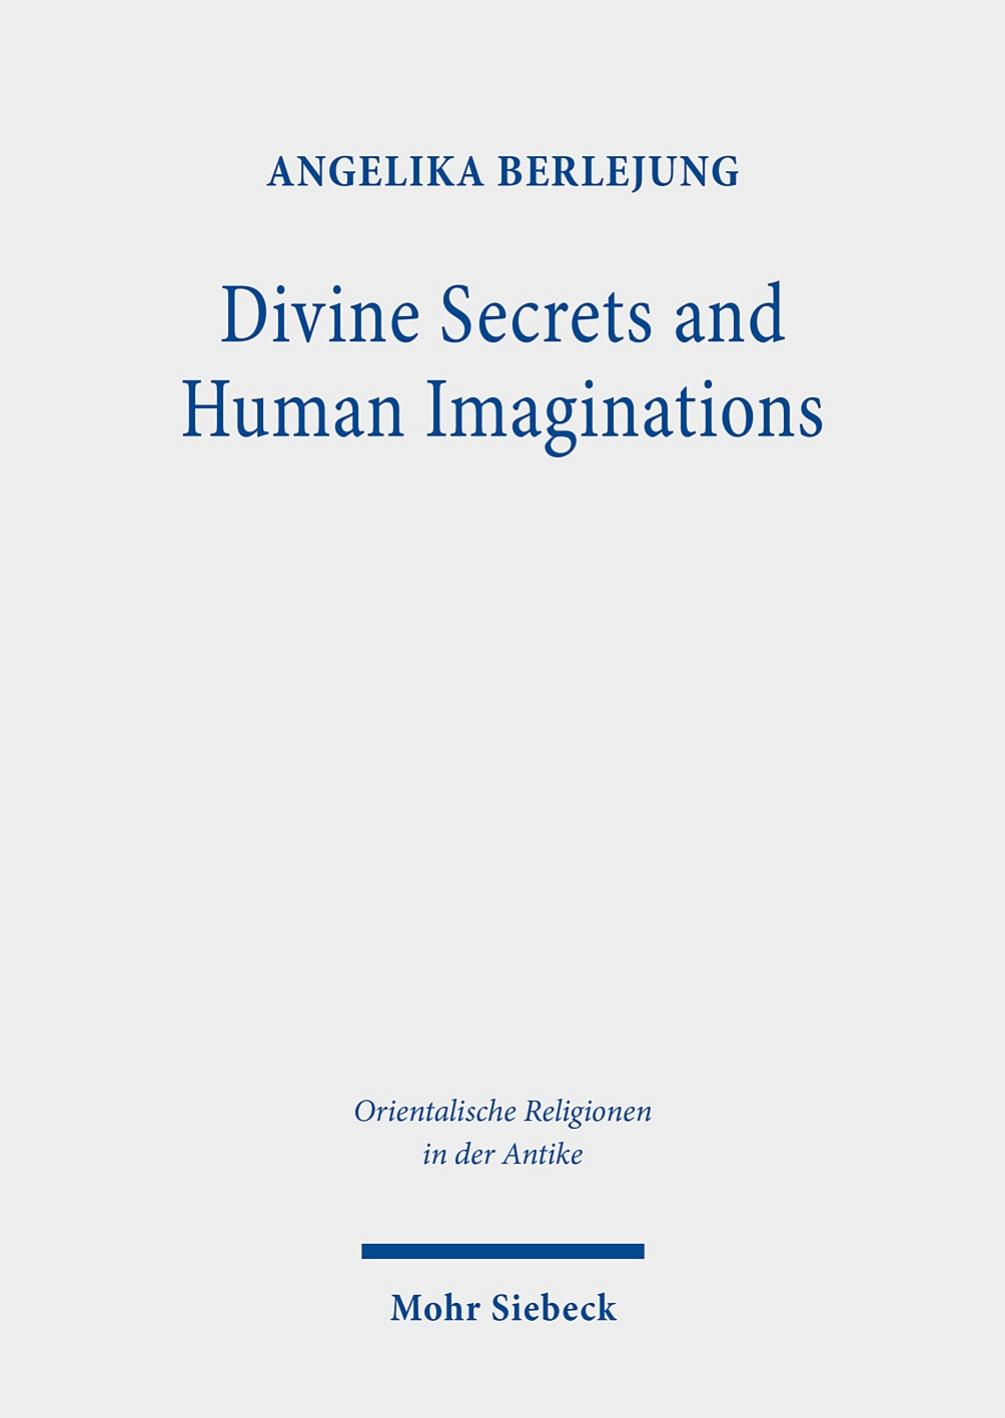 Divine Secrets and Human Imaginations by Angelika Berlejung